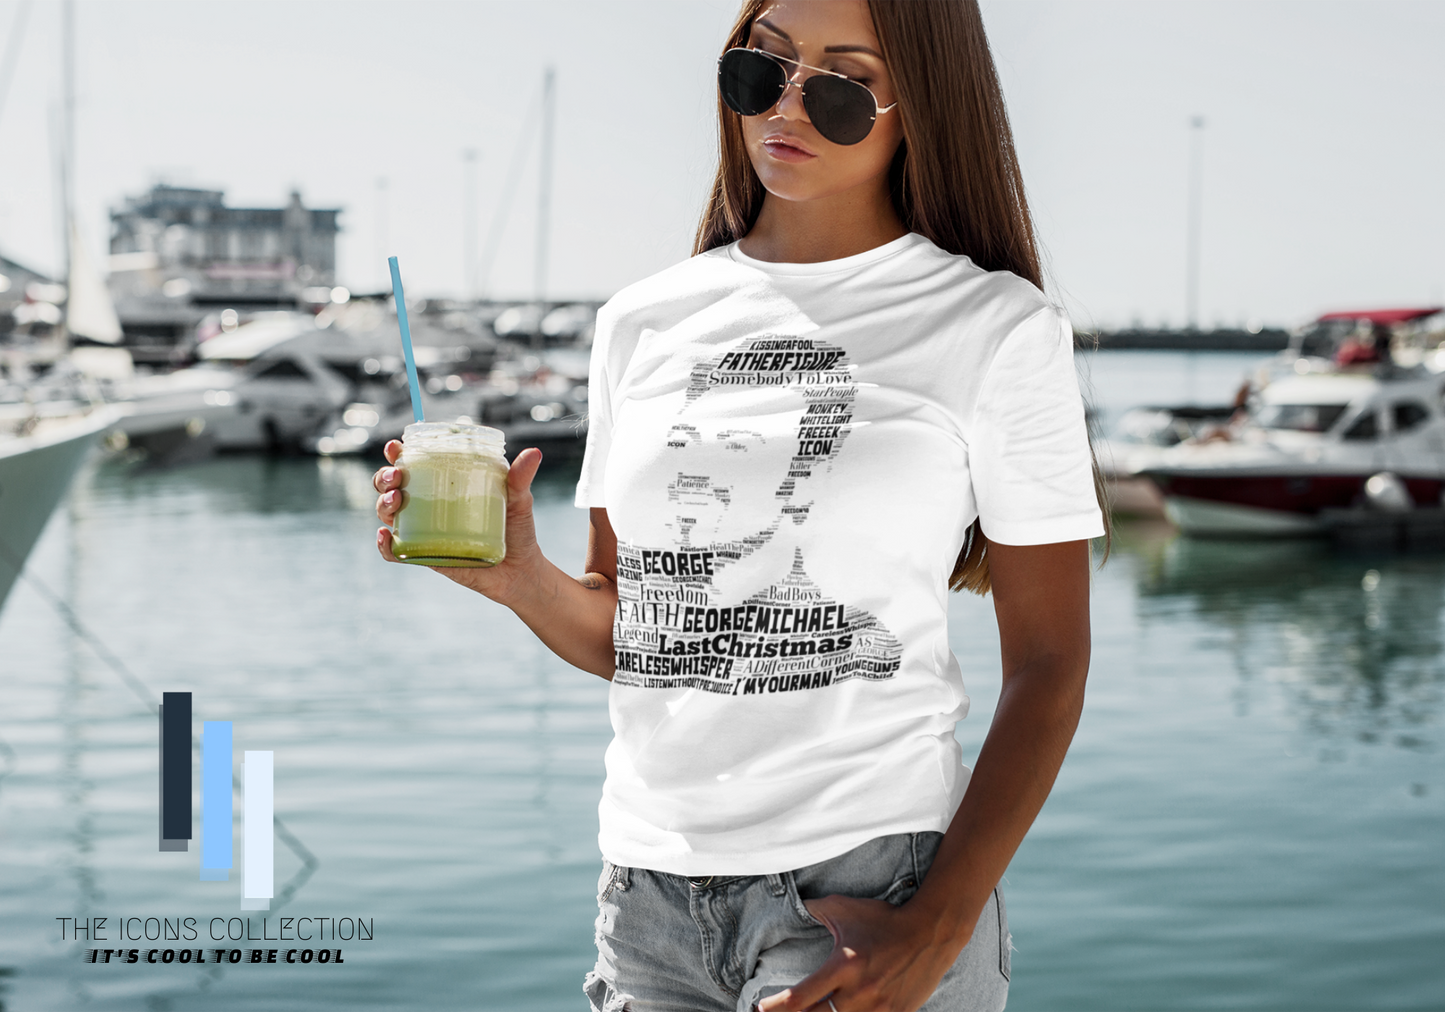 George Michael tribute in 'songs' - Premium T Shirt (100% Supersoft Cotton)